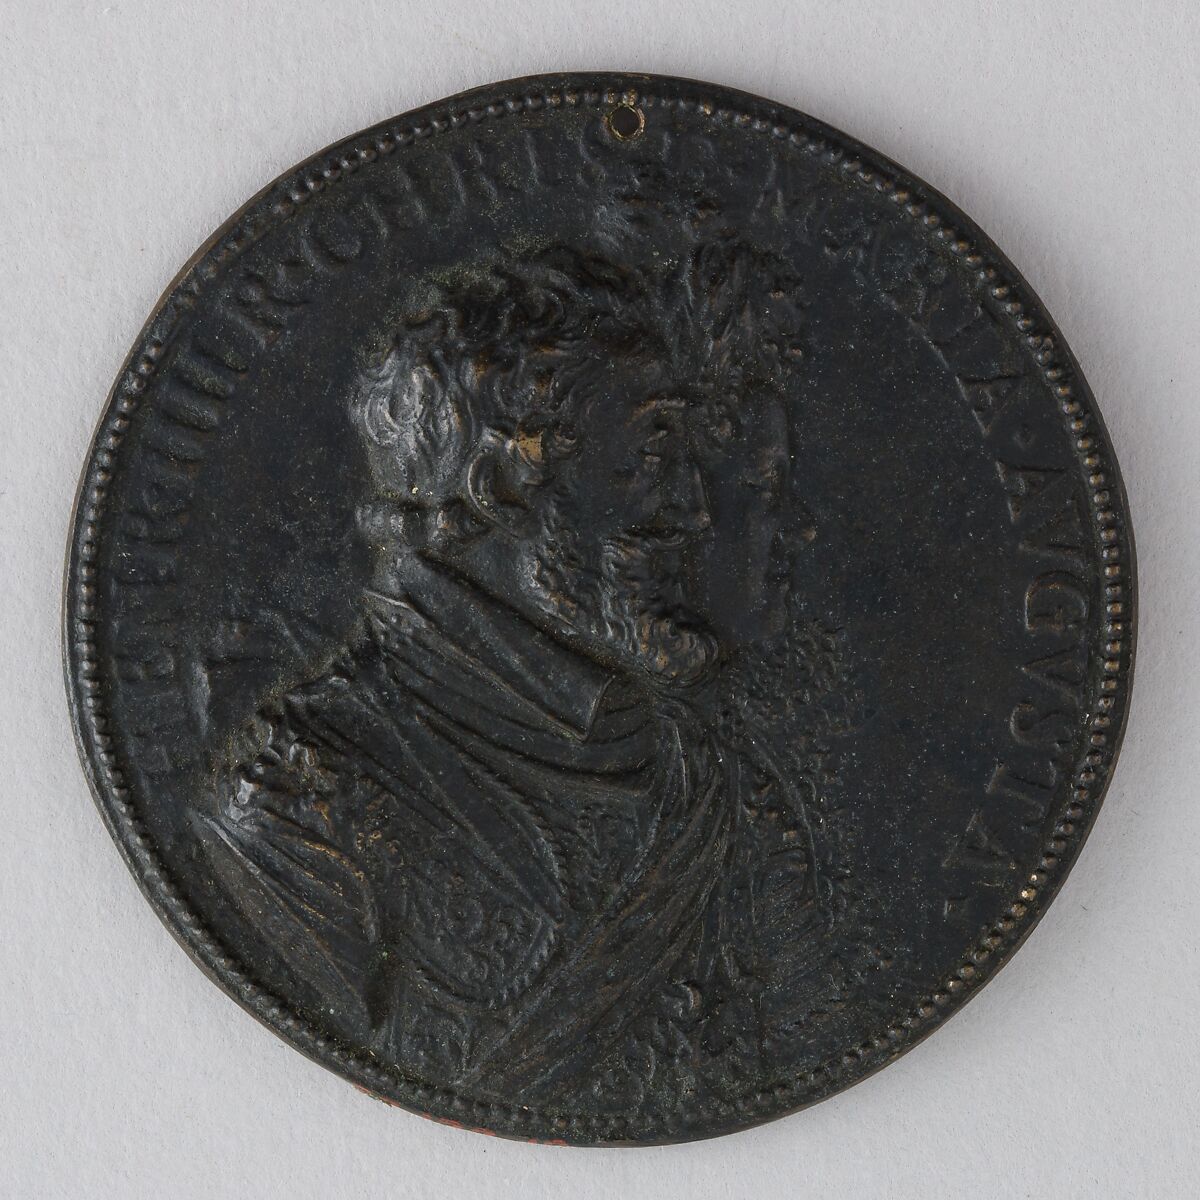 Medal Showing Henry IV of France (b. 1553, r. 1589–1610) and Marie de Médicis (1573–1642), Guillaume Dupré (French, 1579–1640), Bronze, French 